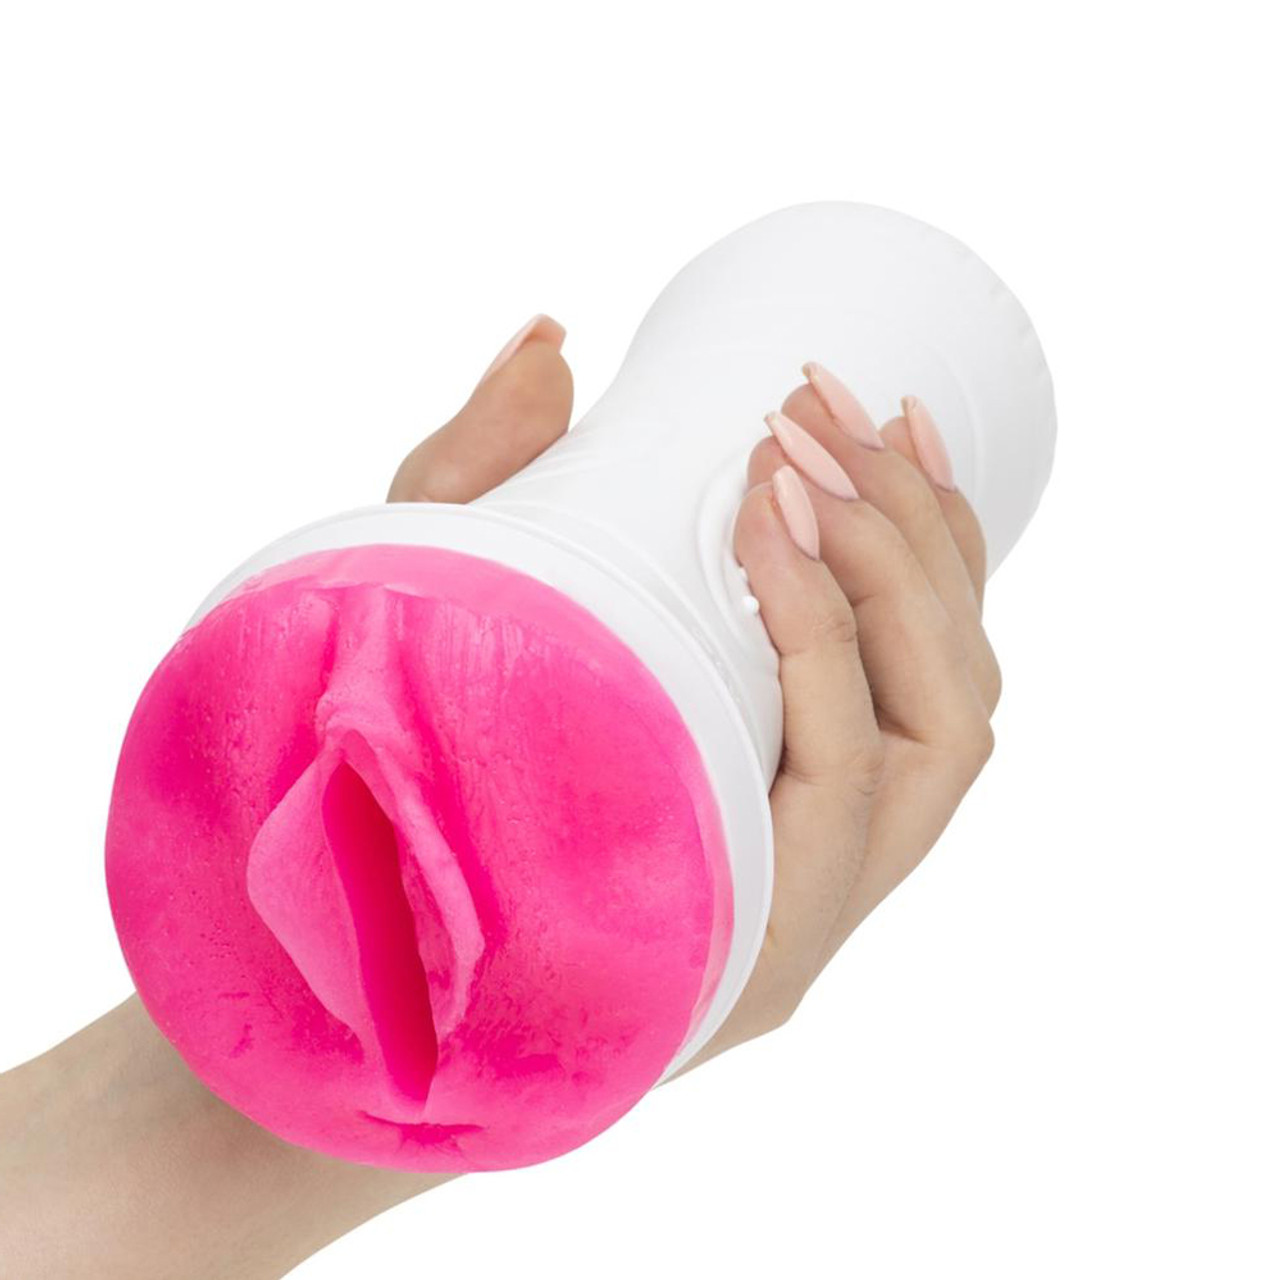 Buy the Clone-A-Pussy + Plus Sleeve Silicone Vulva Vagina Molding Kit with Stroker pic